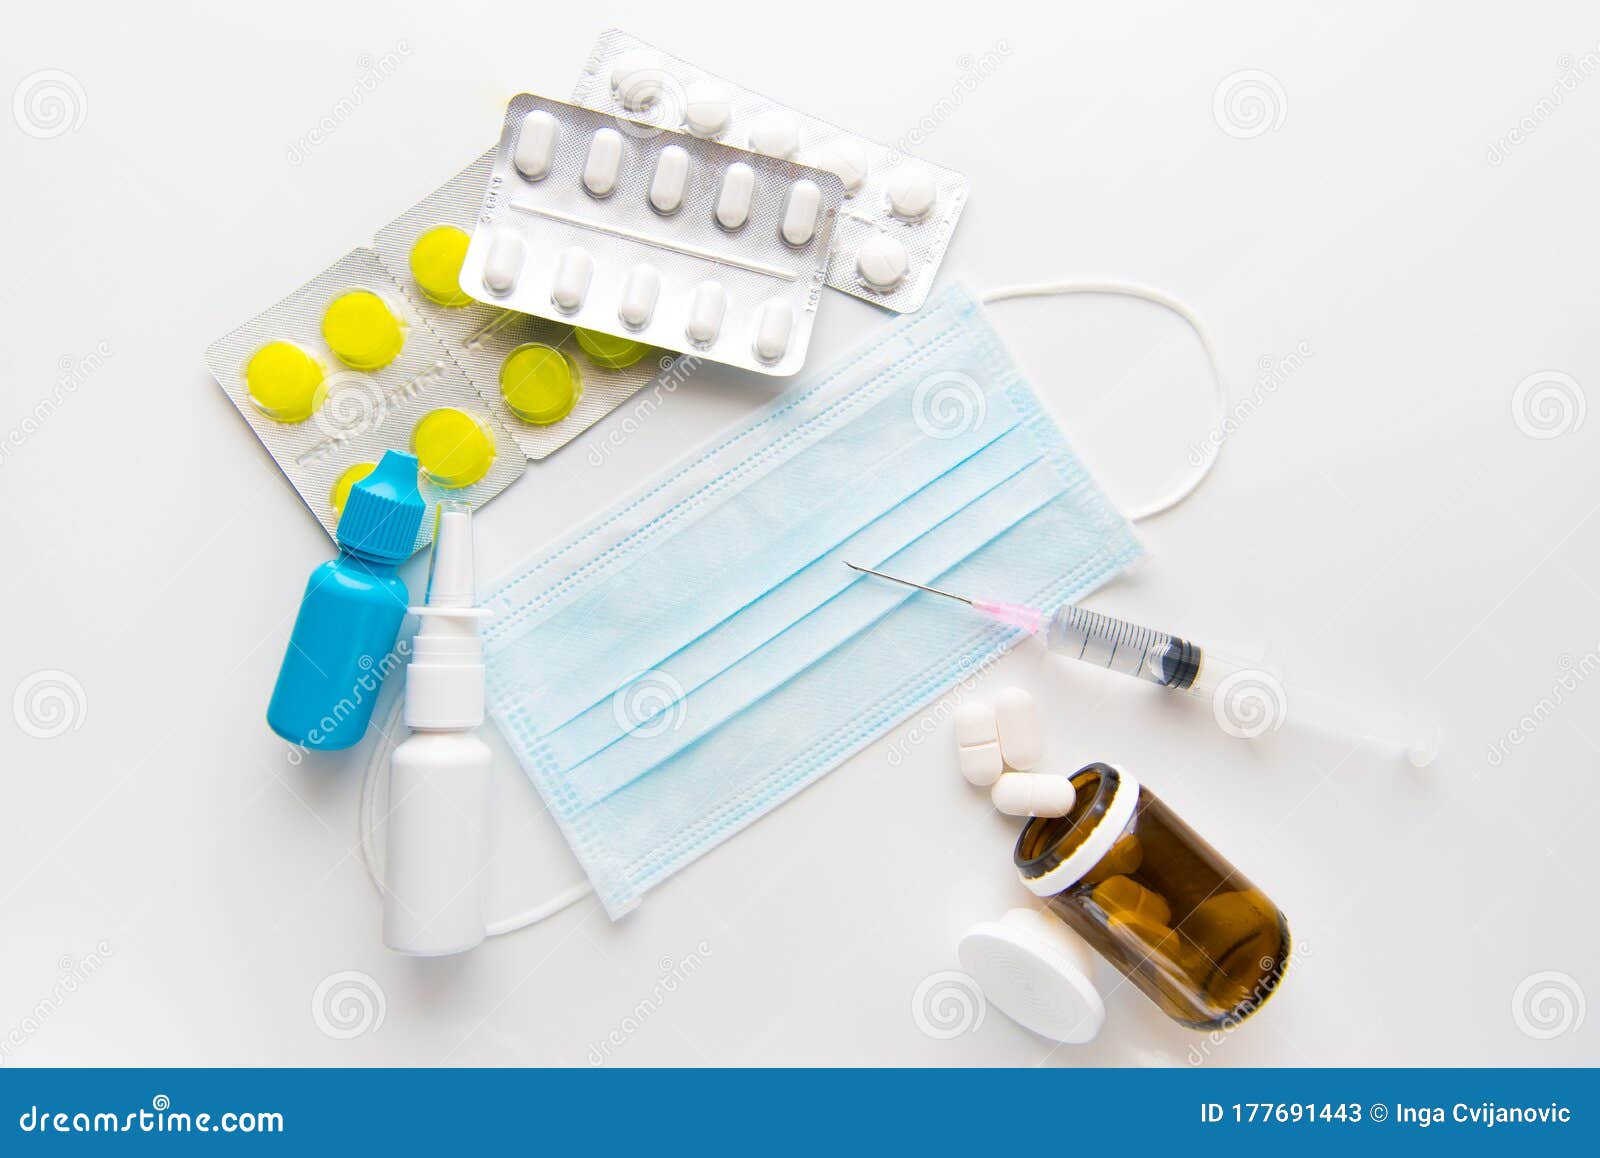 pandemic of coronavirus.  protective surgical mask,spray, pills, drops and syringe on white background.